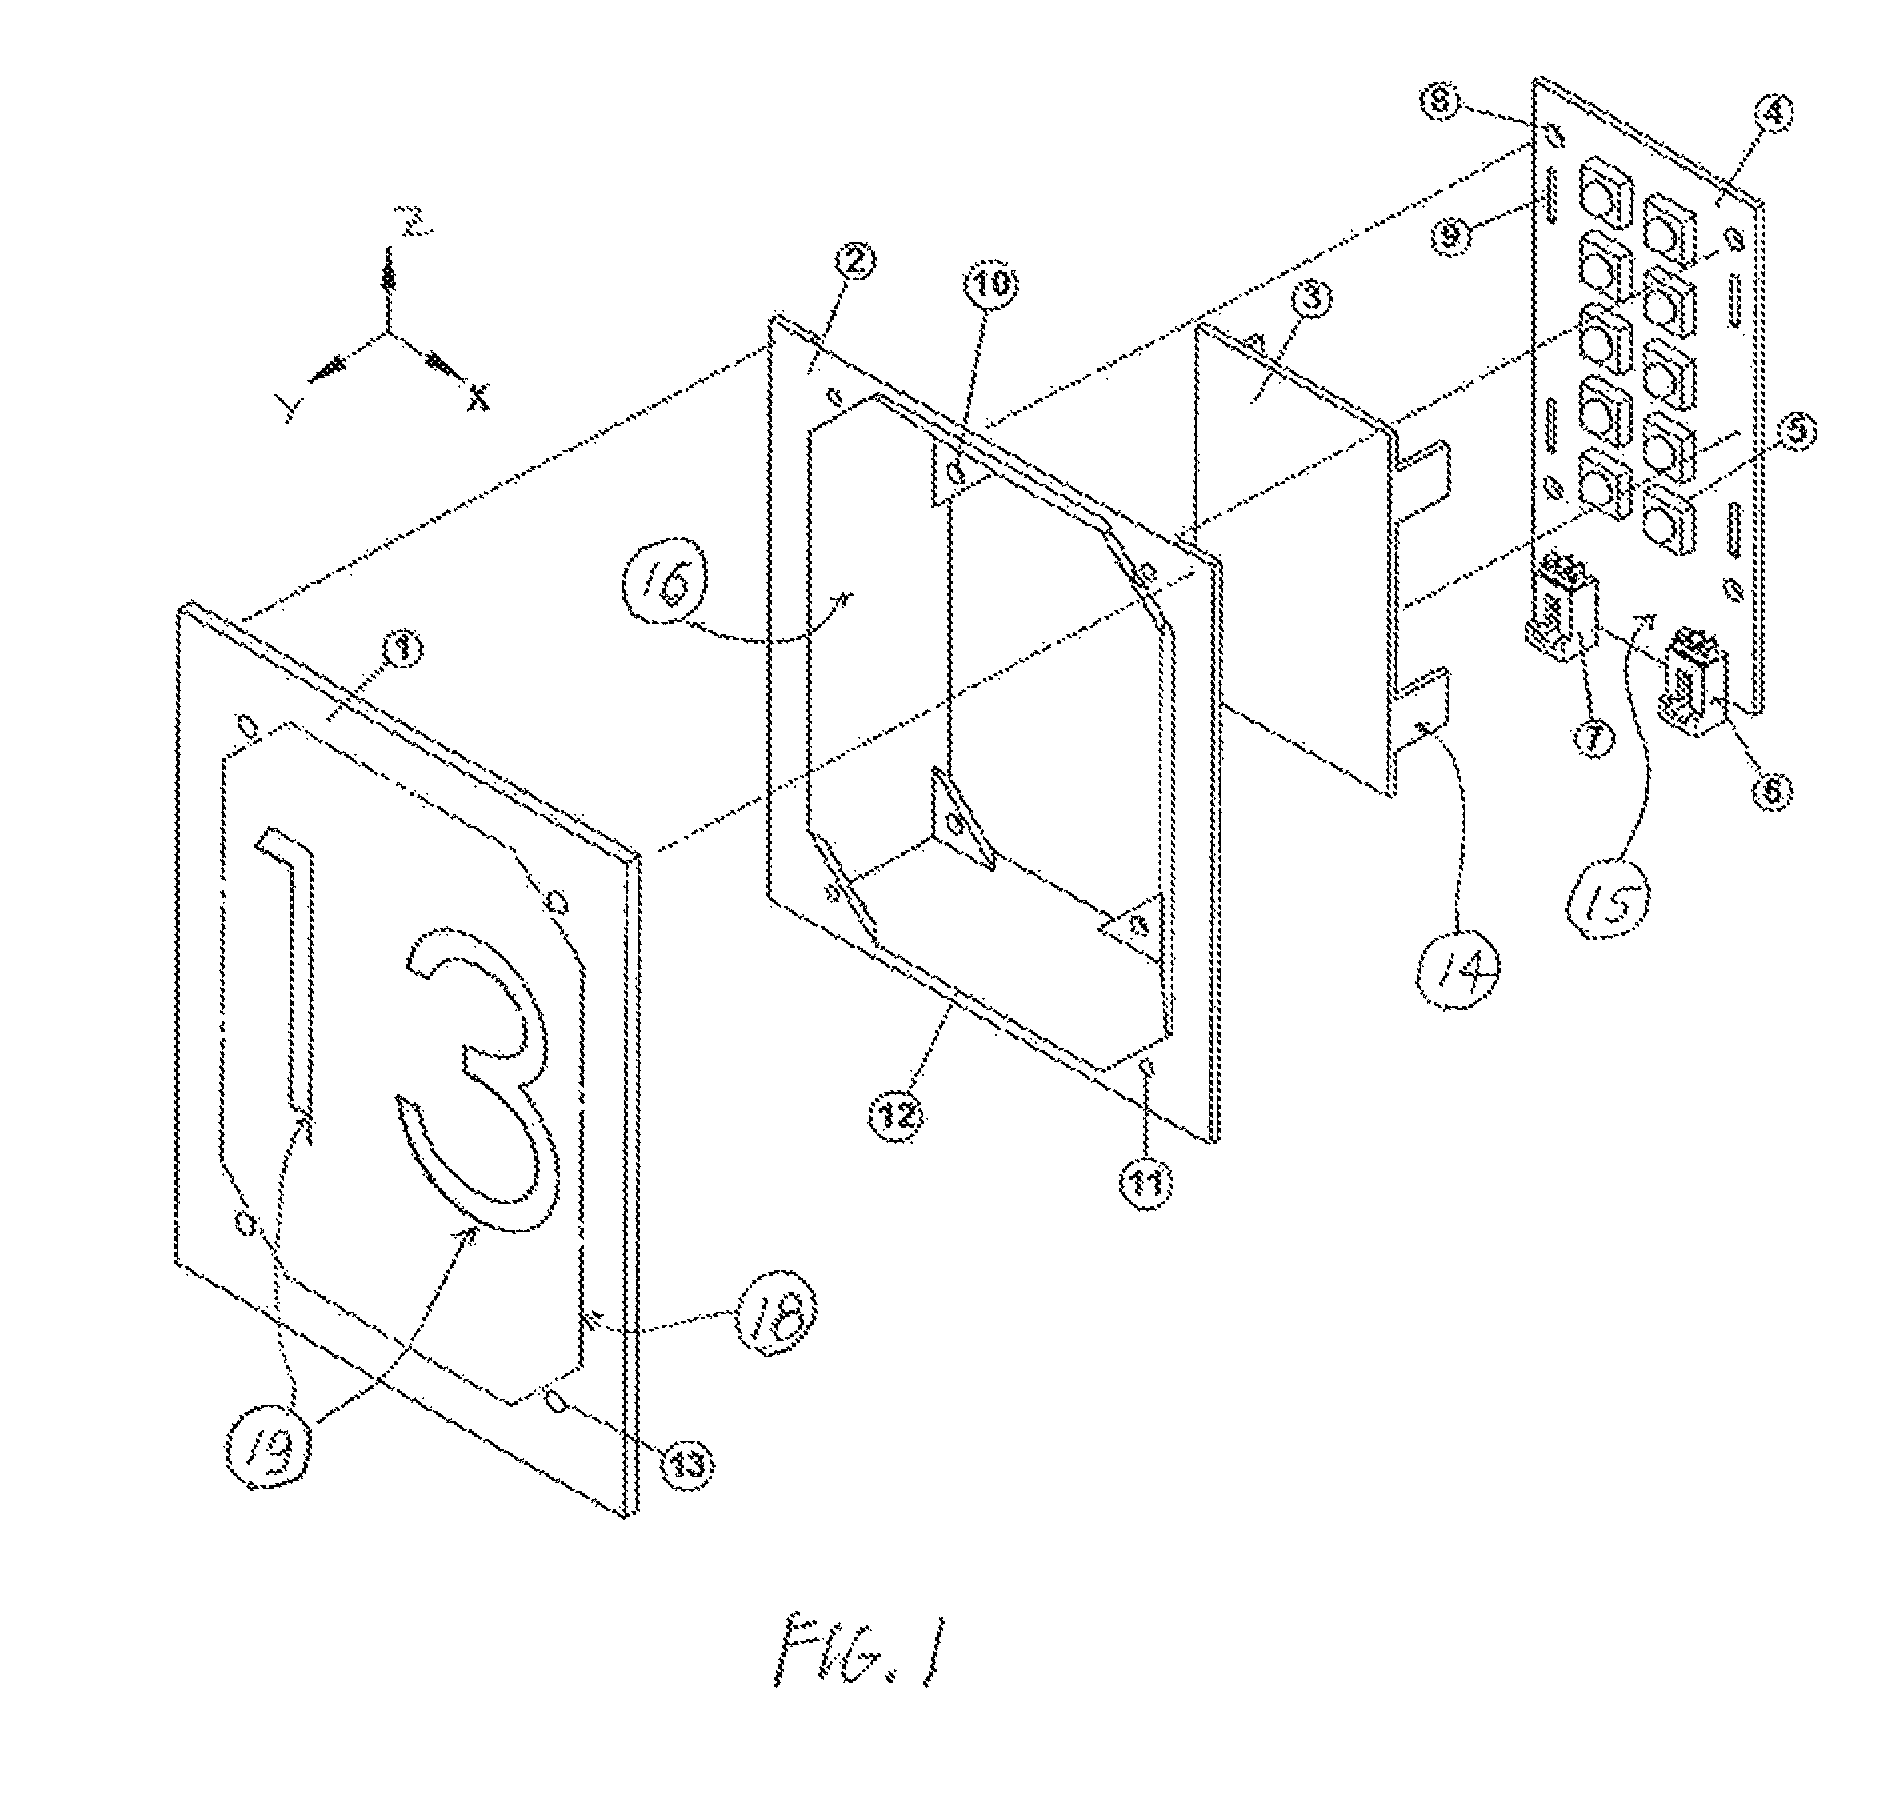 Low-cost solid-state identification device